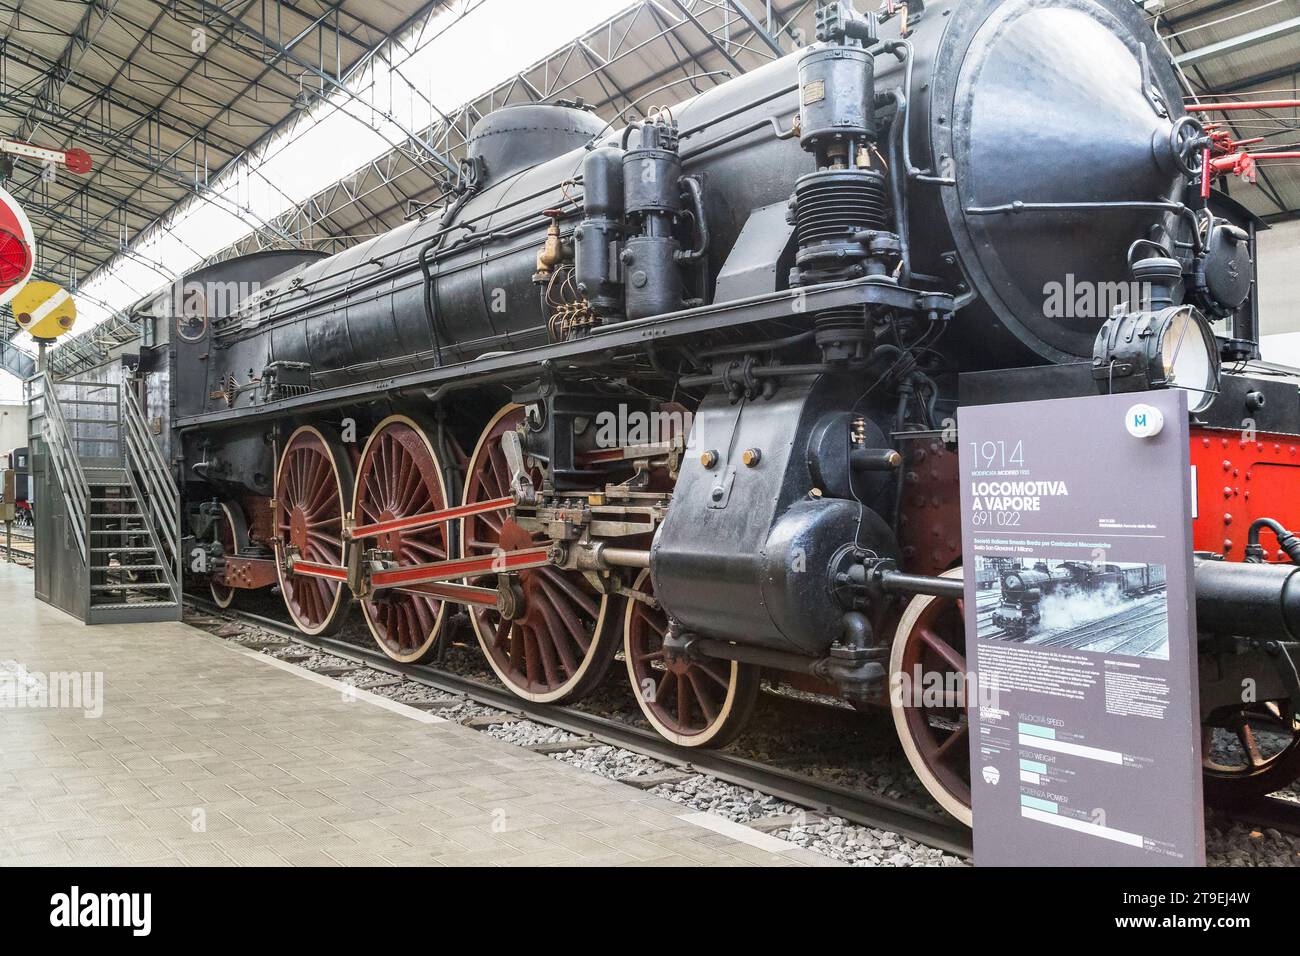 MILAN, ITALY - MAY 19, 2018: This is a exhibit of the collection of locomotives beginning of the twentieth century in the Museum of Science and Techno Stock Photo